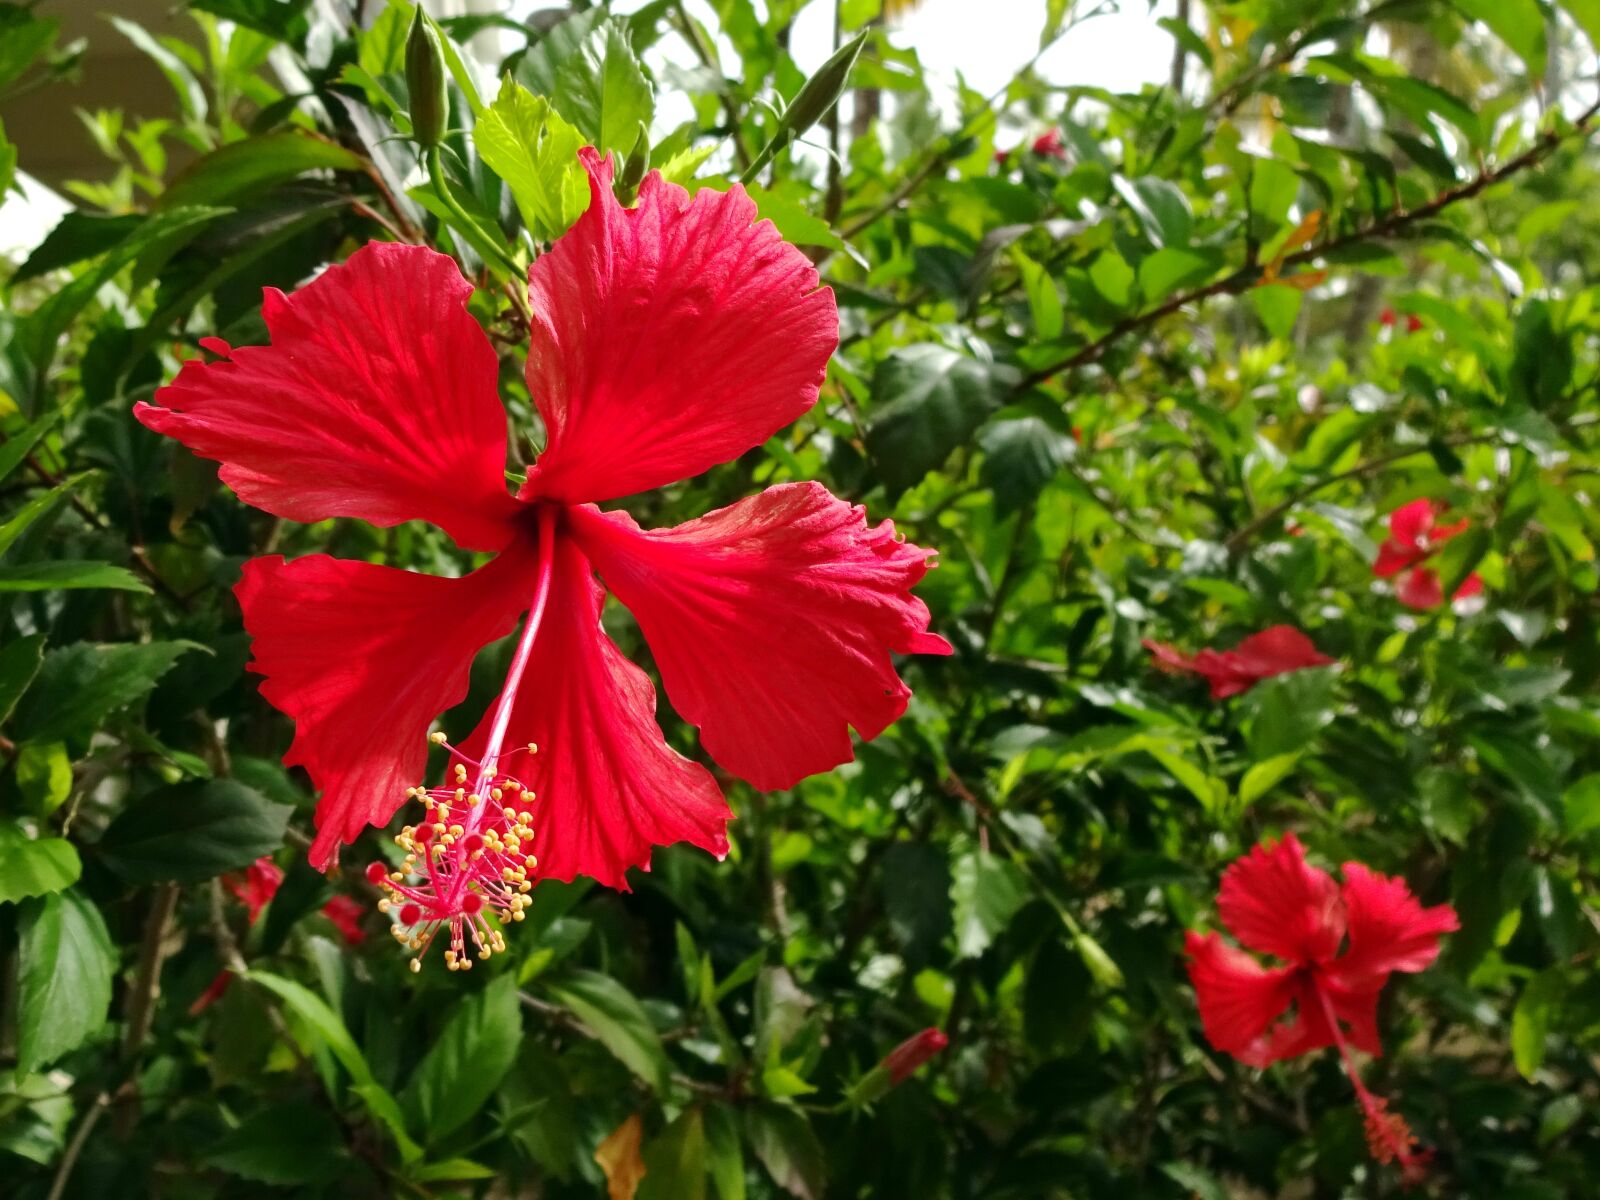 Sony Cyber-shot DSC-WX220 sample photo. Hibiscus, rosa sinensis, flower photography